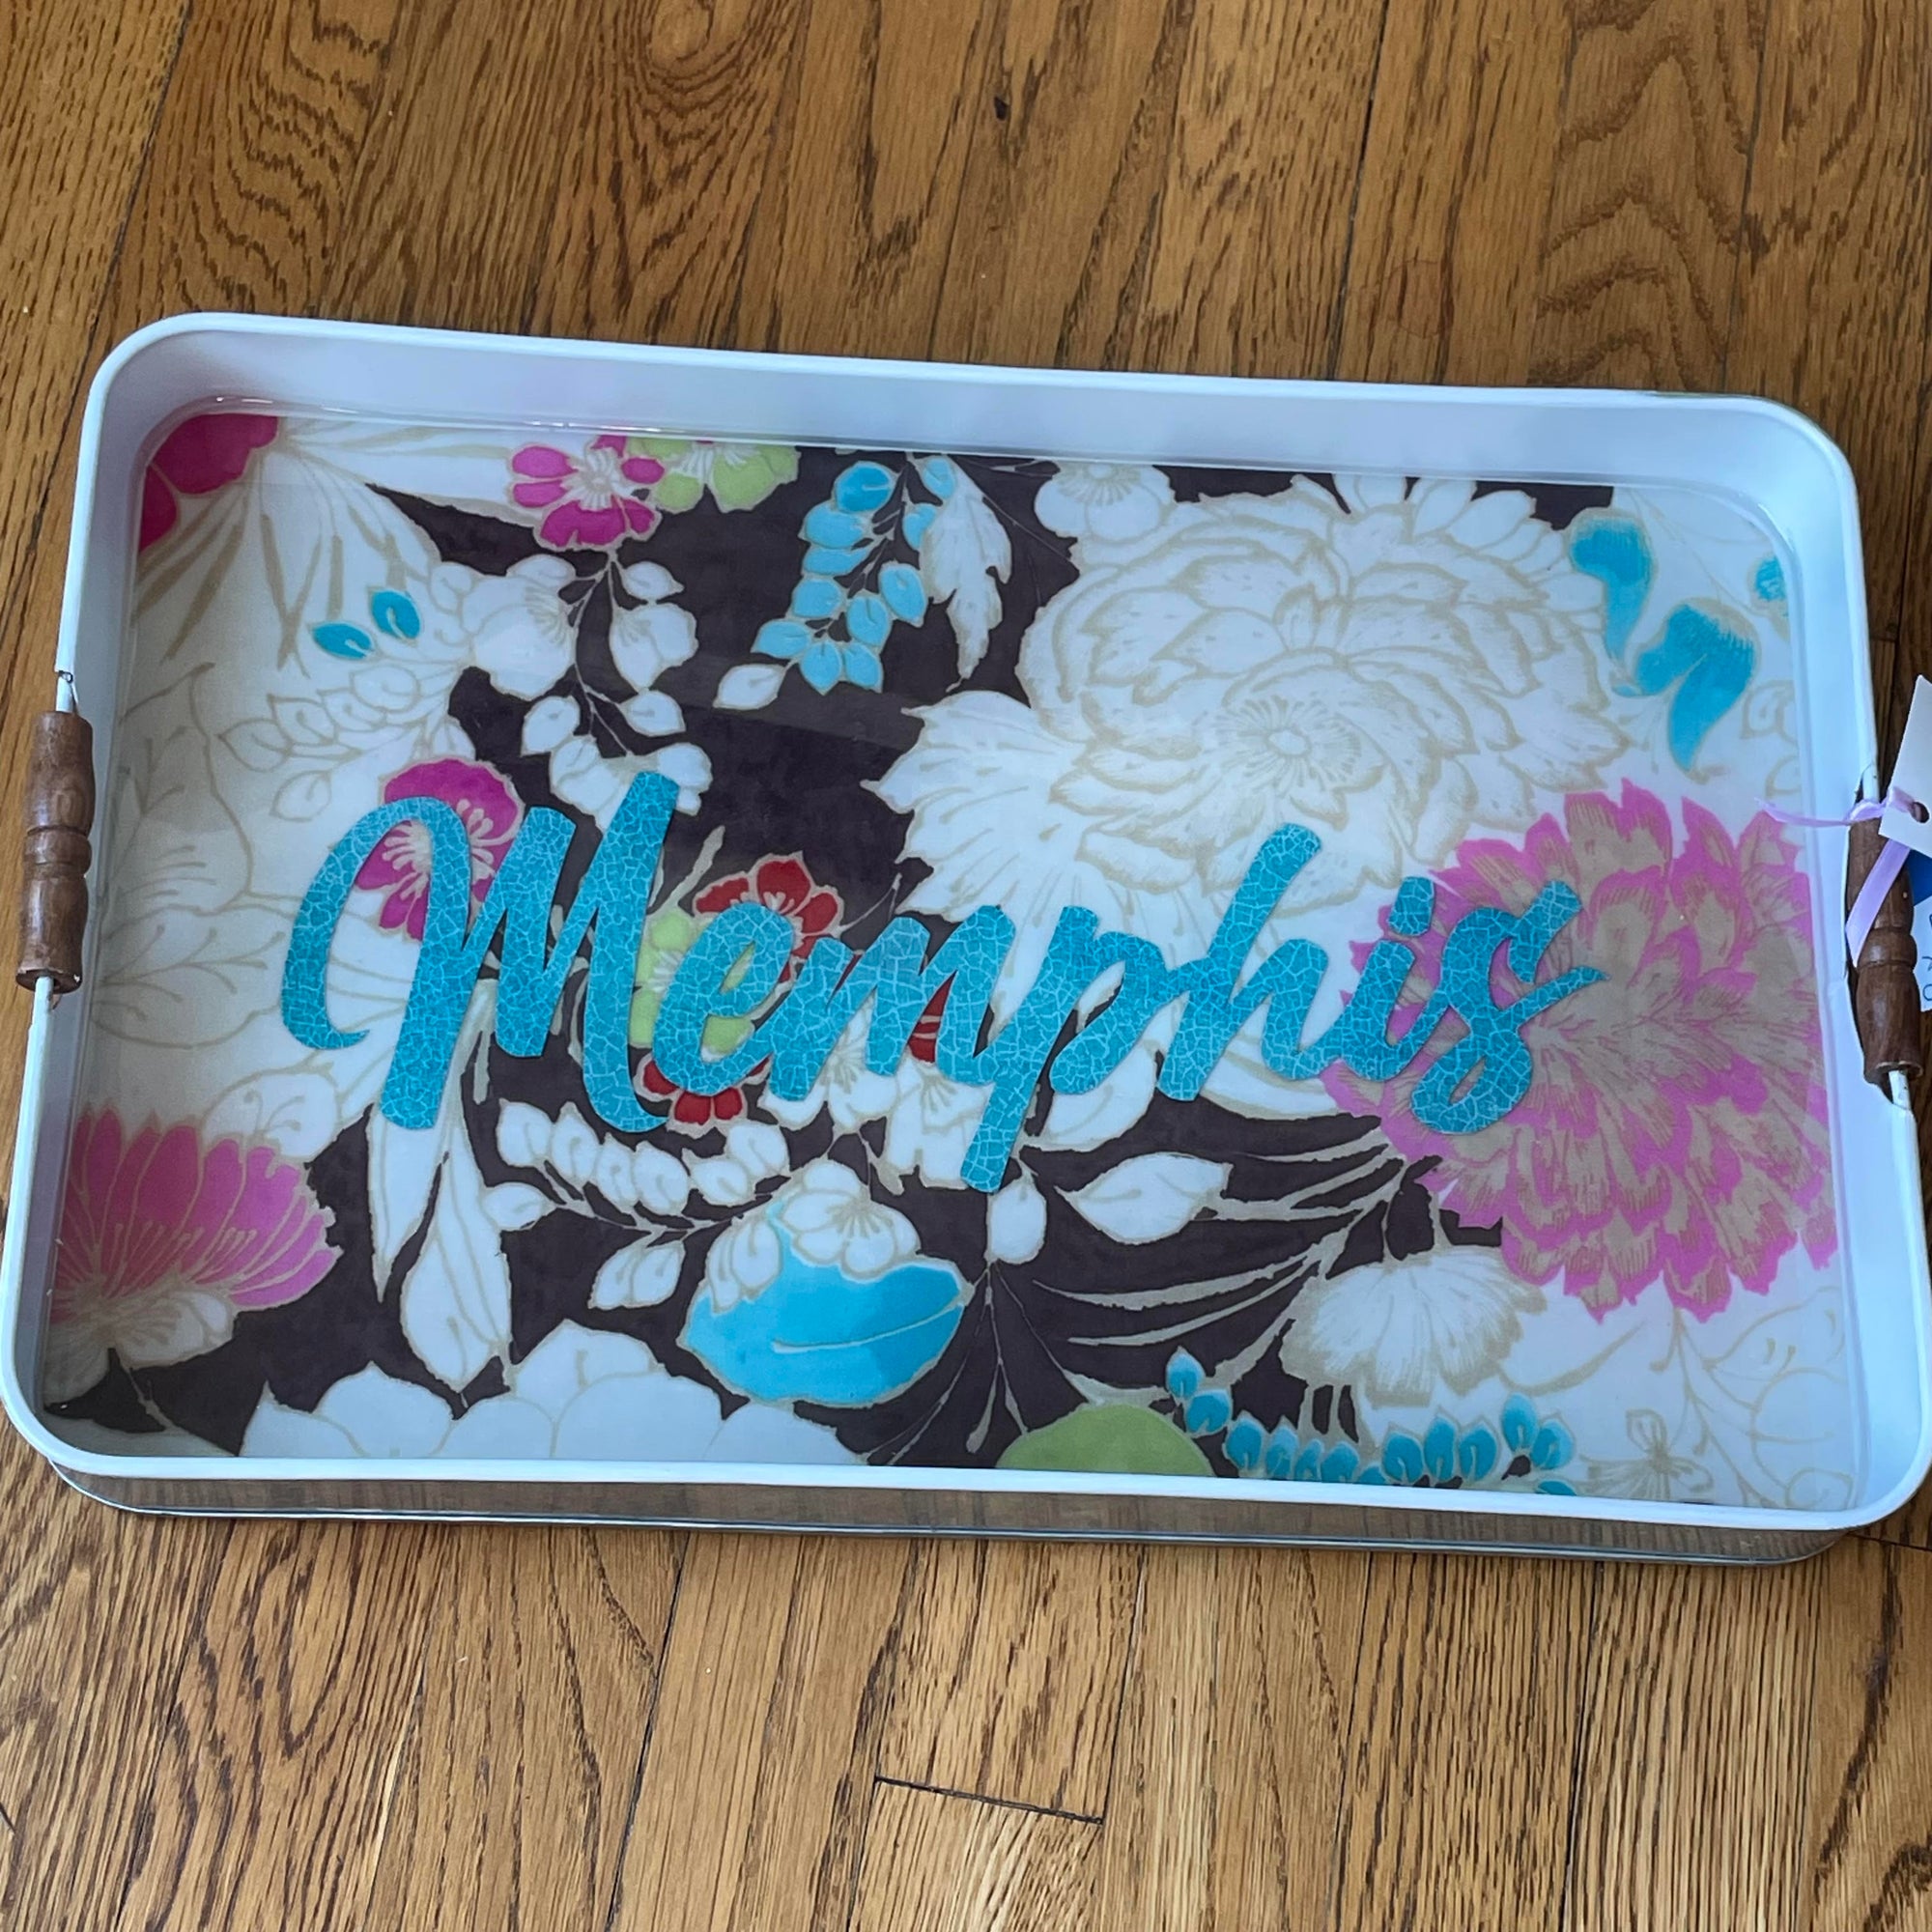 12"x18.5" Memphis white Metal Tray with flowers by Original Fabric artist AnnaMade Designs...Anna Kelly